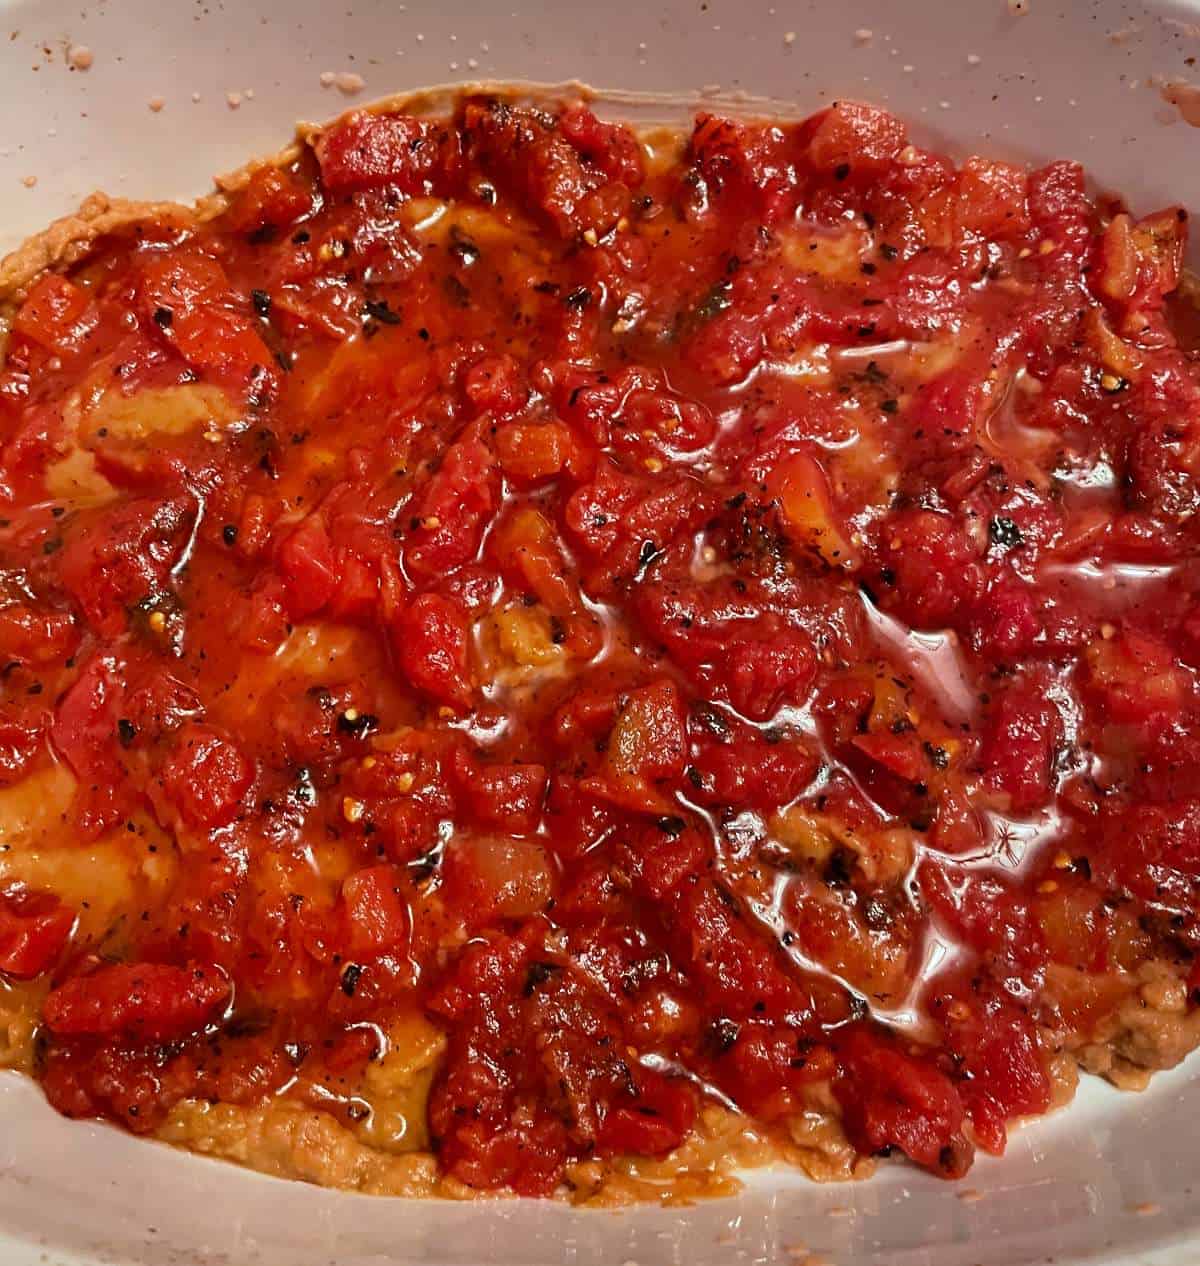 layer of diced tomatoes covering refried beans in a baking dish.